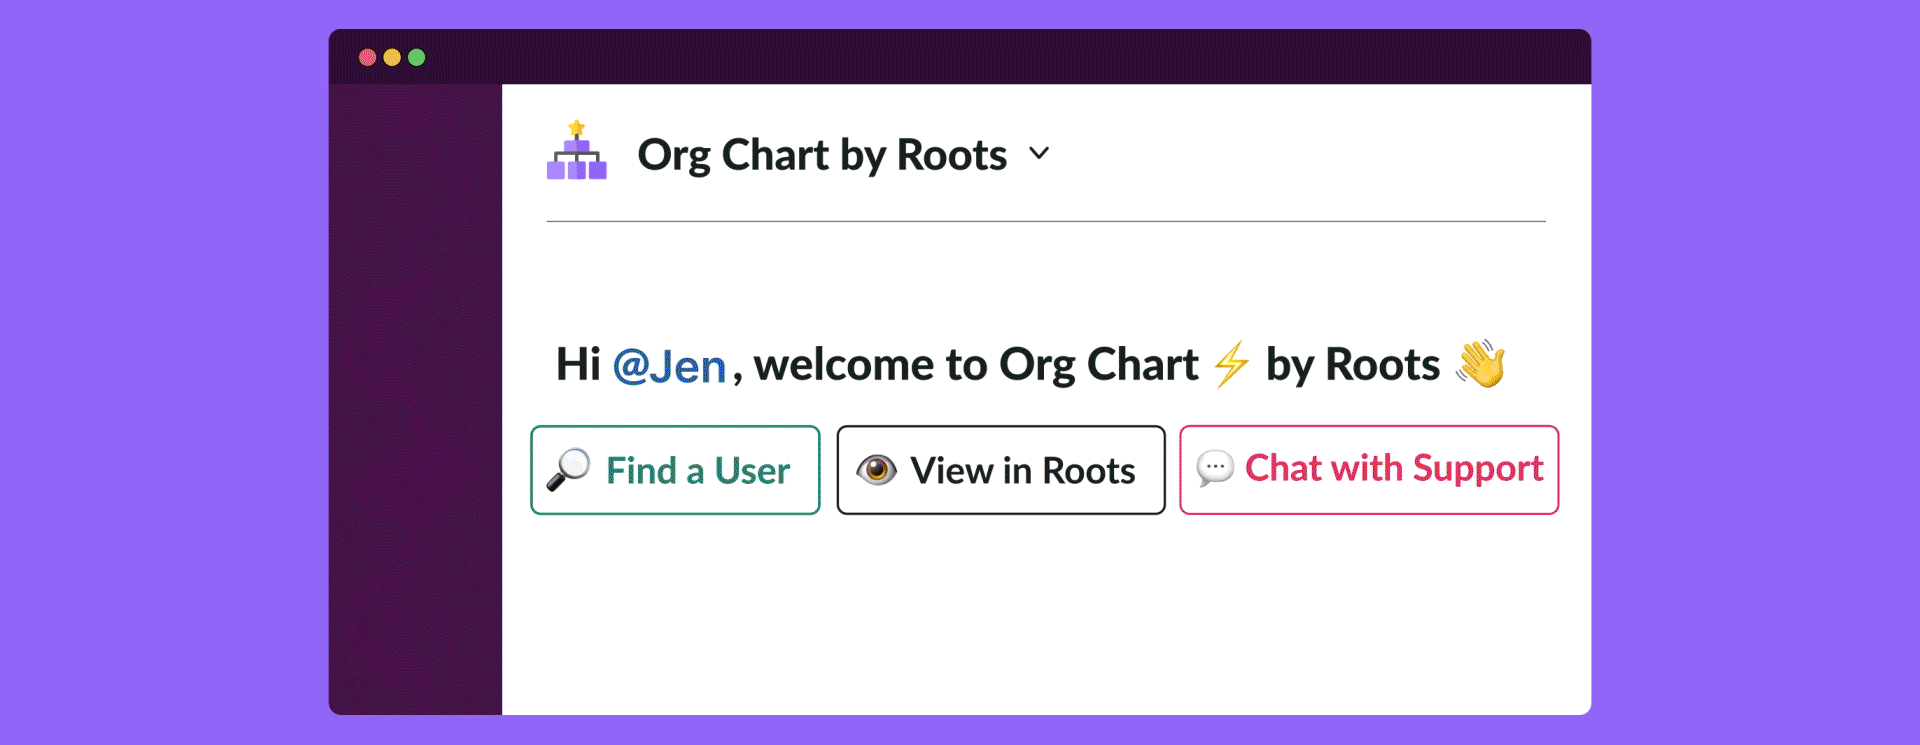 Org Chart by Roots media 3